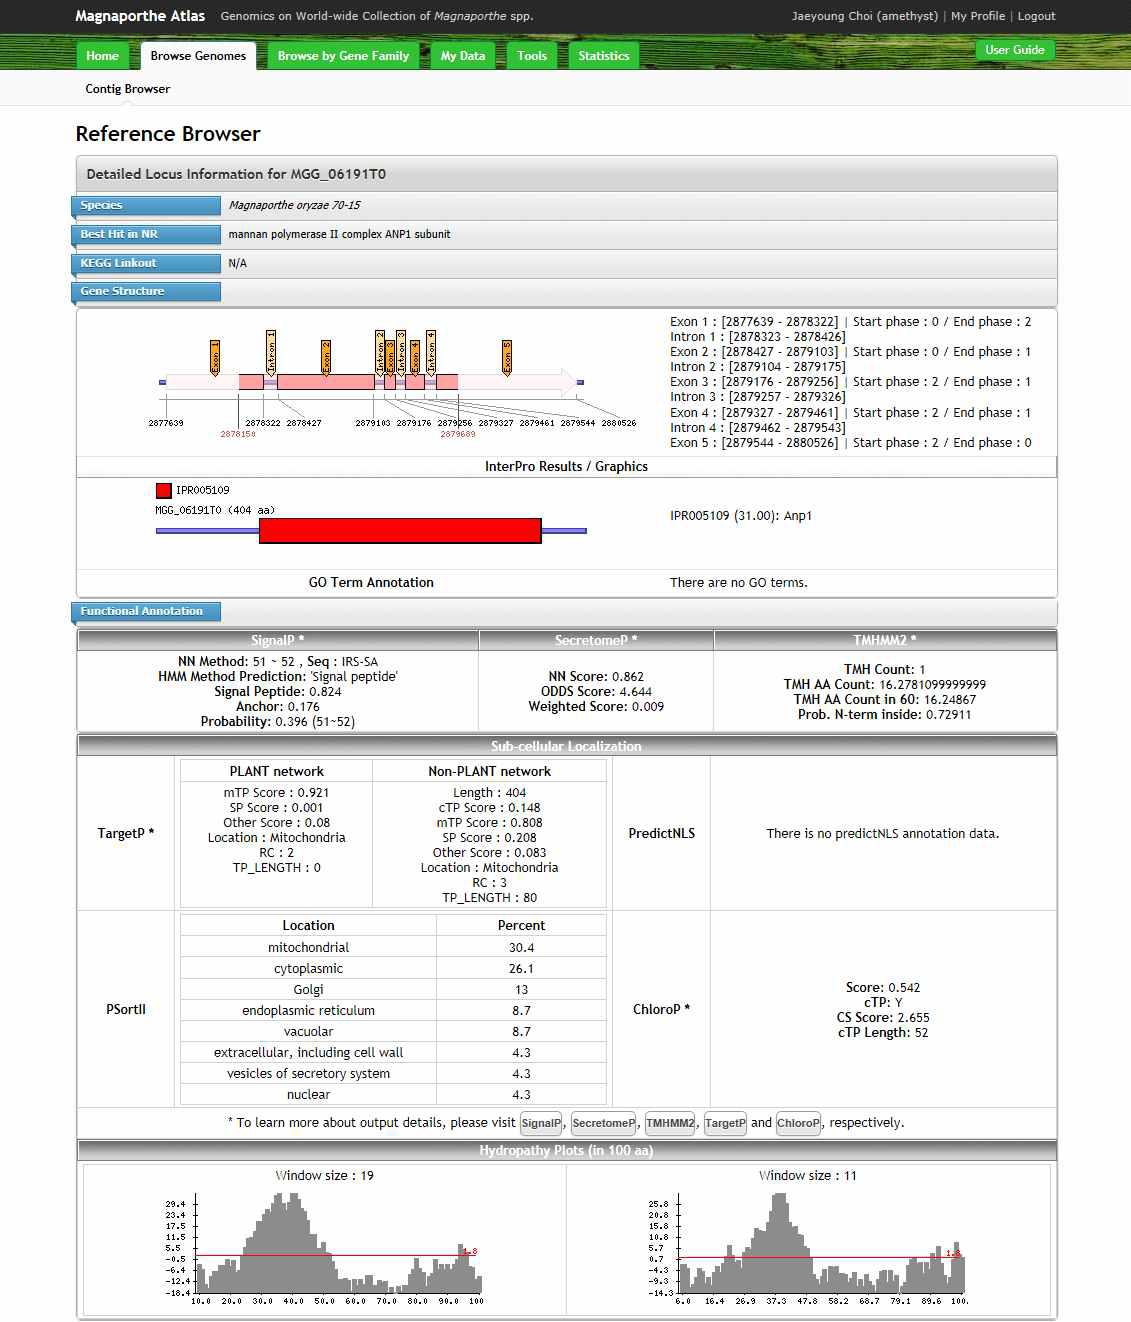 Detail information page for an individual gene with the results from bioinformatics programs including InterPro scan, SignalP, SecretomeP, TMHMM2, TargetP, PSortII, predictNLS, ChloroP, Hydropathy plot.